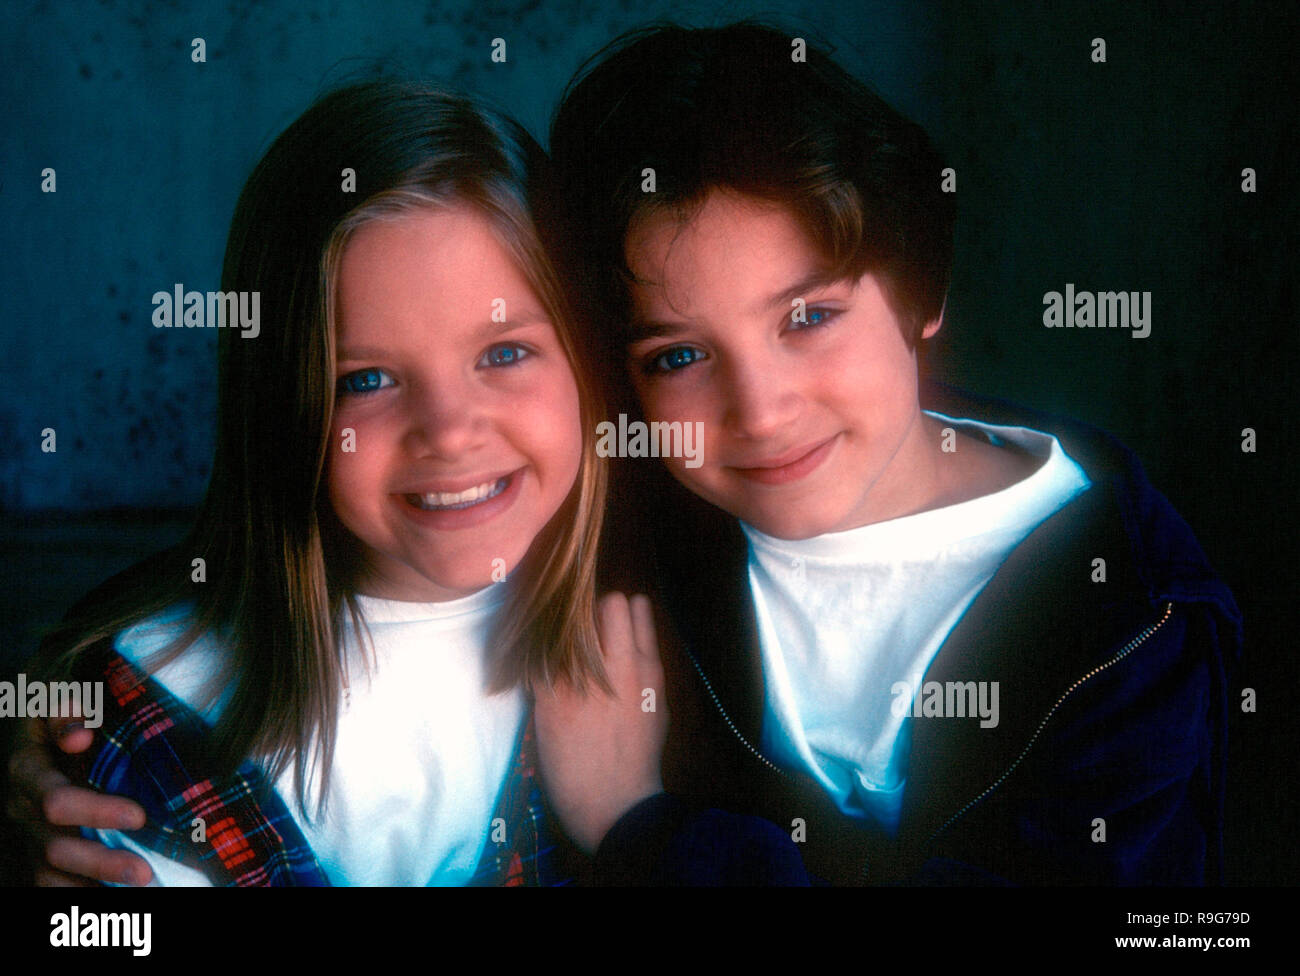 LOS ANGELES, CA -JUNE 6: (EXCLUSIVE) Actress Hannah Wood and brother actor Elijah Wood pose at a photo shoot on June 6, 1993 in Los Angeles, California. Photo by Barry King/Alamy Stock Photo Stock Photo